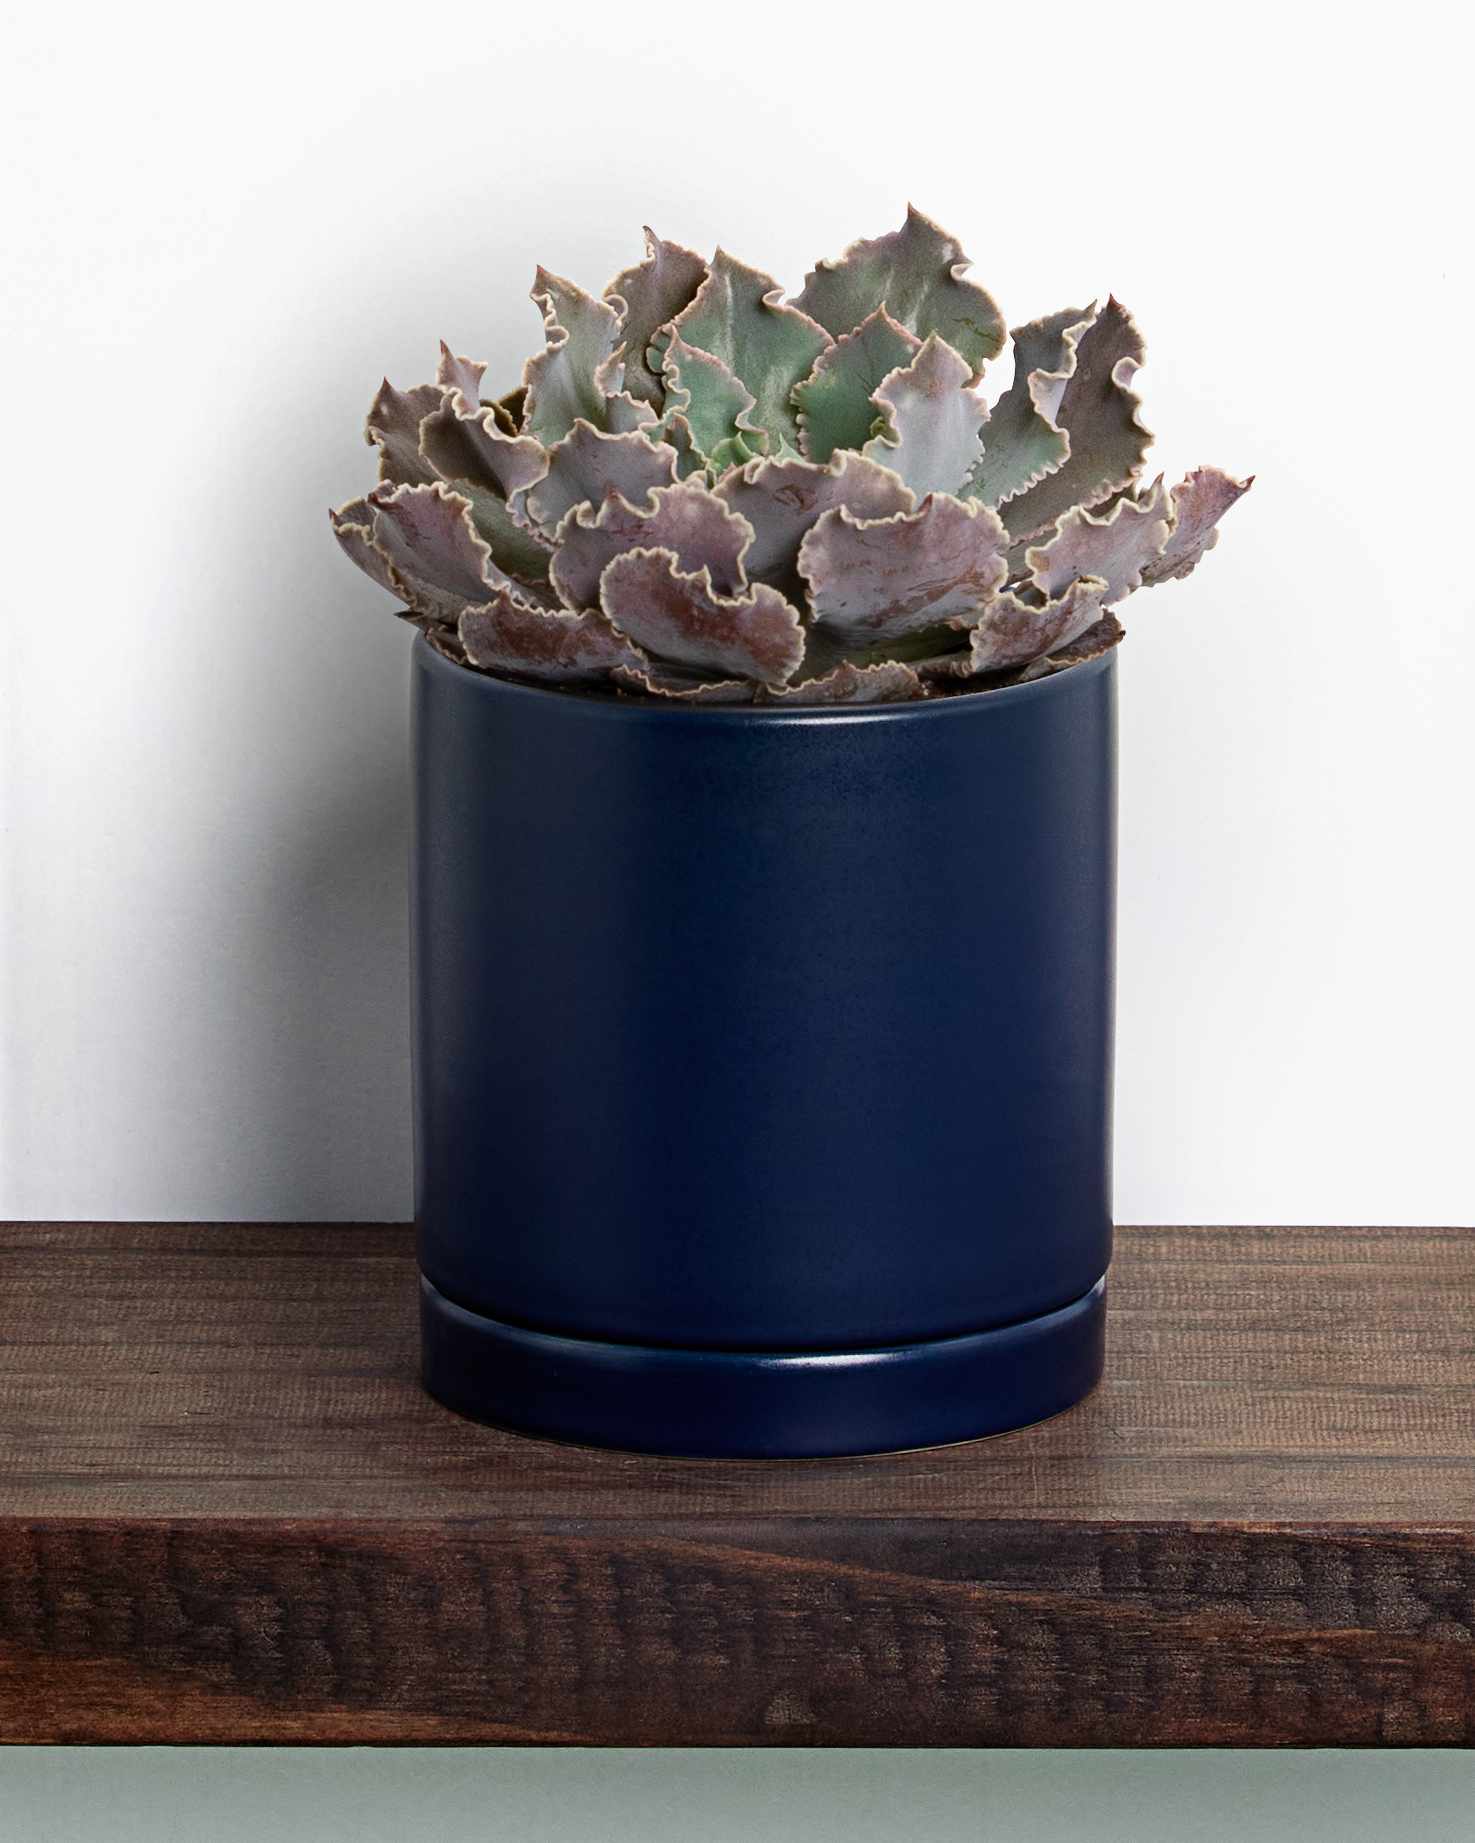 frilly green and muted pink plant in dark blue pot